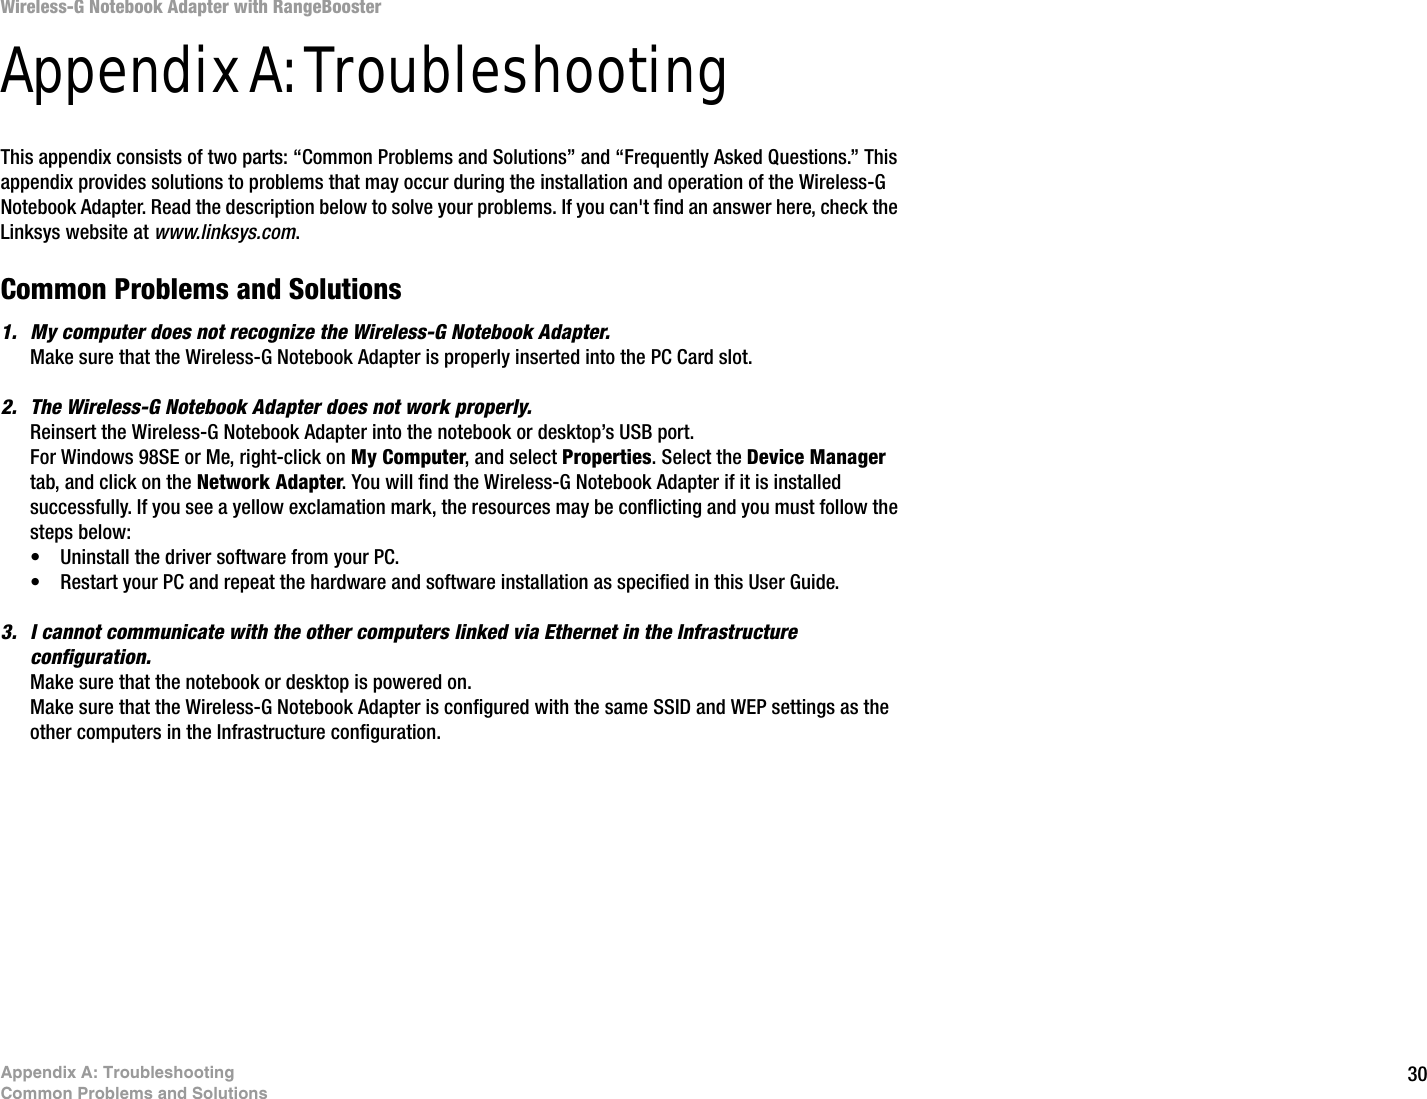 30Appendix A: TroubleshootingCommon Problems and SolutionsWireless-G Notebook Adapter with RangeBoosterAppendix A: TroubleshootingThis appendix consists of two parts: “Common Problems and Solutions” and “Frequently Asked Questions.” This appendix provides solutions to problems that may occur during the installation and operation of the Wireless-G Notebook Adapter. Read the description below to solve your problems. If you can&apos;t find an answer here, check the Linksys website at www.linksys.com.Common Problems and Solutions1. My computer does not recognize the Wireless-G Notebook Adapter.Make sure that the Wireless-G Notebook Adapter is properly inserted into the PC Card slot.2. The Wireless-G Notebook Adapter does not work properly.Reinsert the Wireless-G Notebook Adapter into the notebook or desktop’s USB port. For Windows 98SE or Me, right-click on My Computer, and select Properties. Select the Device Manager tab, and click on the Network Adapter. You will find the Wireless-G Notebook Adapter if it is installed successfully. If you see a yellow exclamation mark, the resources may be conflicting and you must follow the steps below:• Uninstall the driver software from your PC.• Restart your PC and repeat the hardware and software installation as specified in this User Guide.3. I cannot communicate with the other computers linked via Ethernet in the Infrastructure configuration.Make sure that the notebook or desktop is powered on.Make sure that the Wireless-G Notebook Adapter is configured with the same SSID and WEP settings as the other computers in the Infrastructure configuration. 